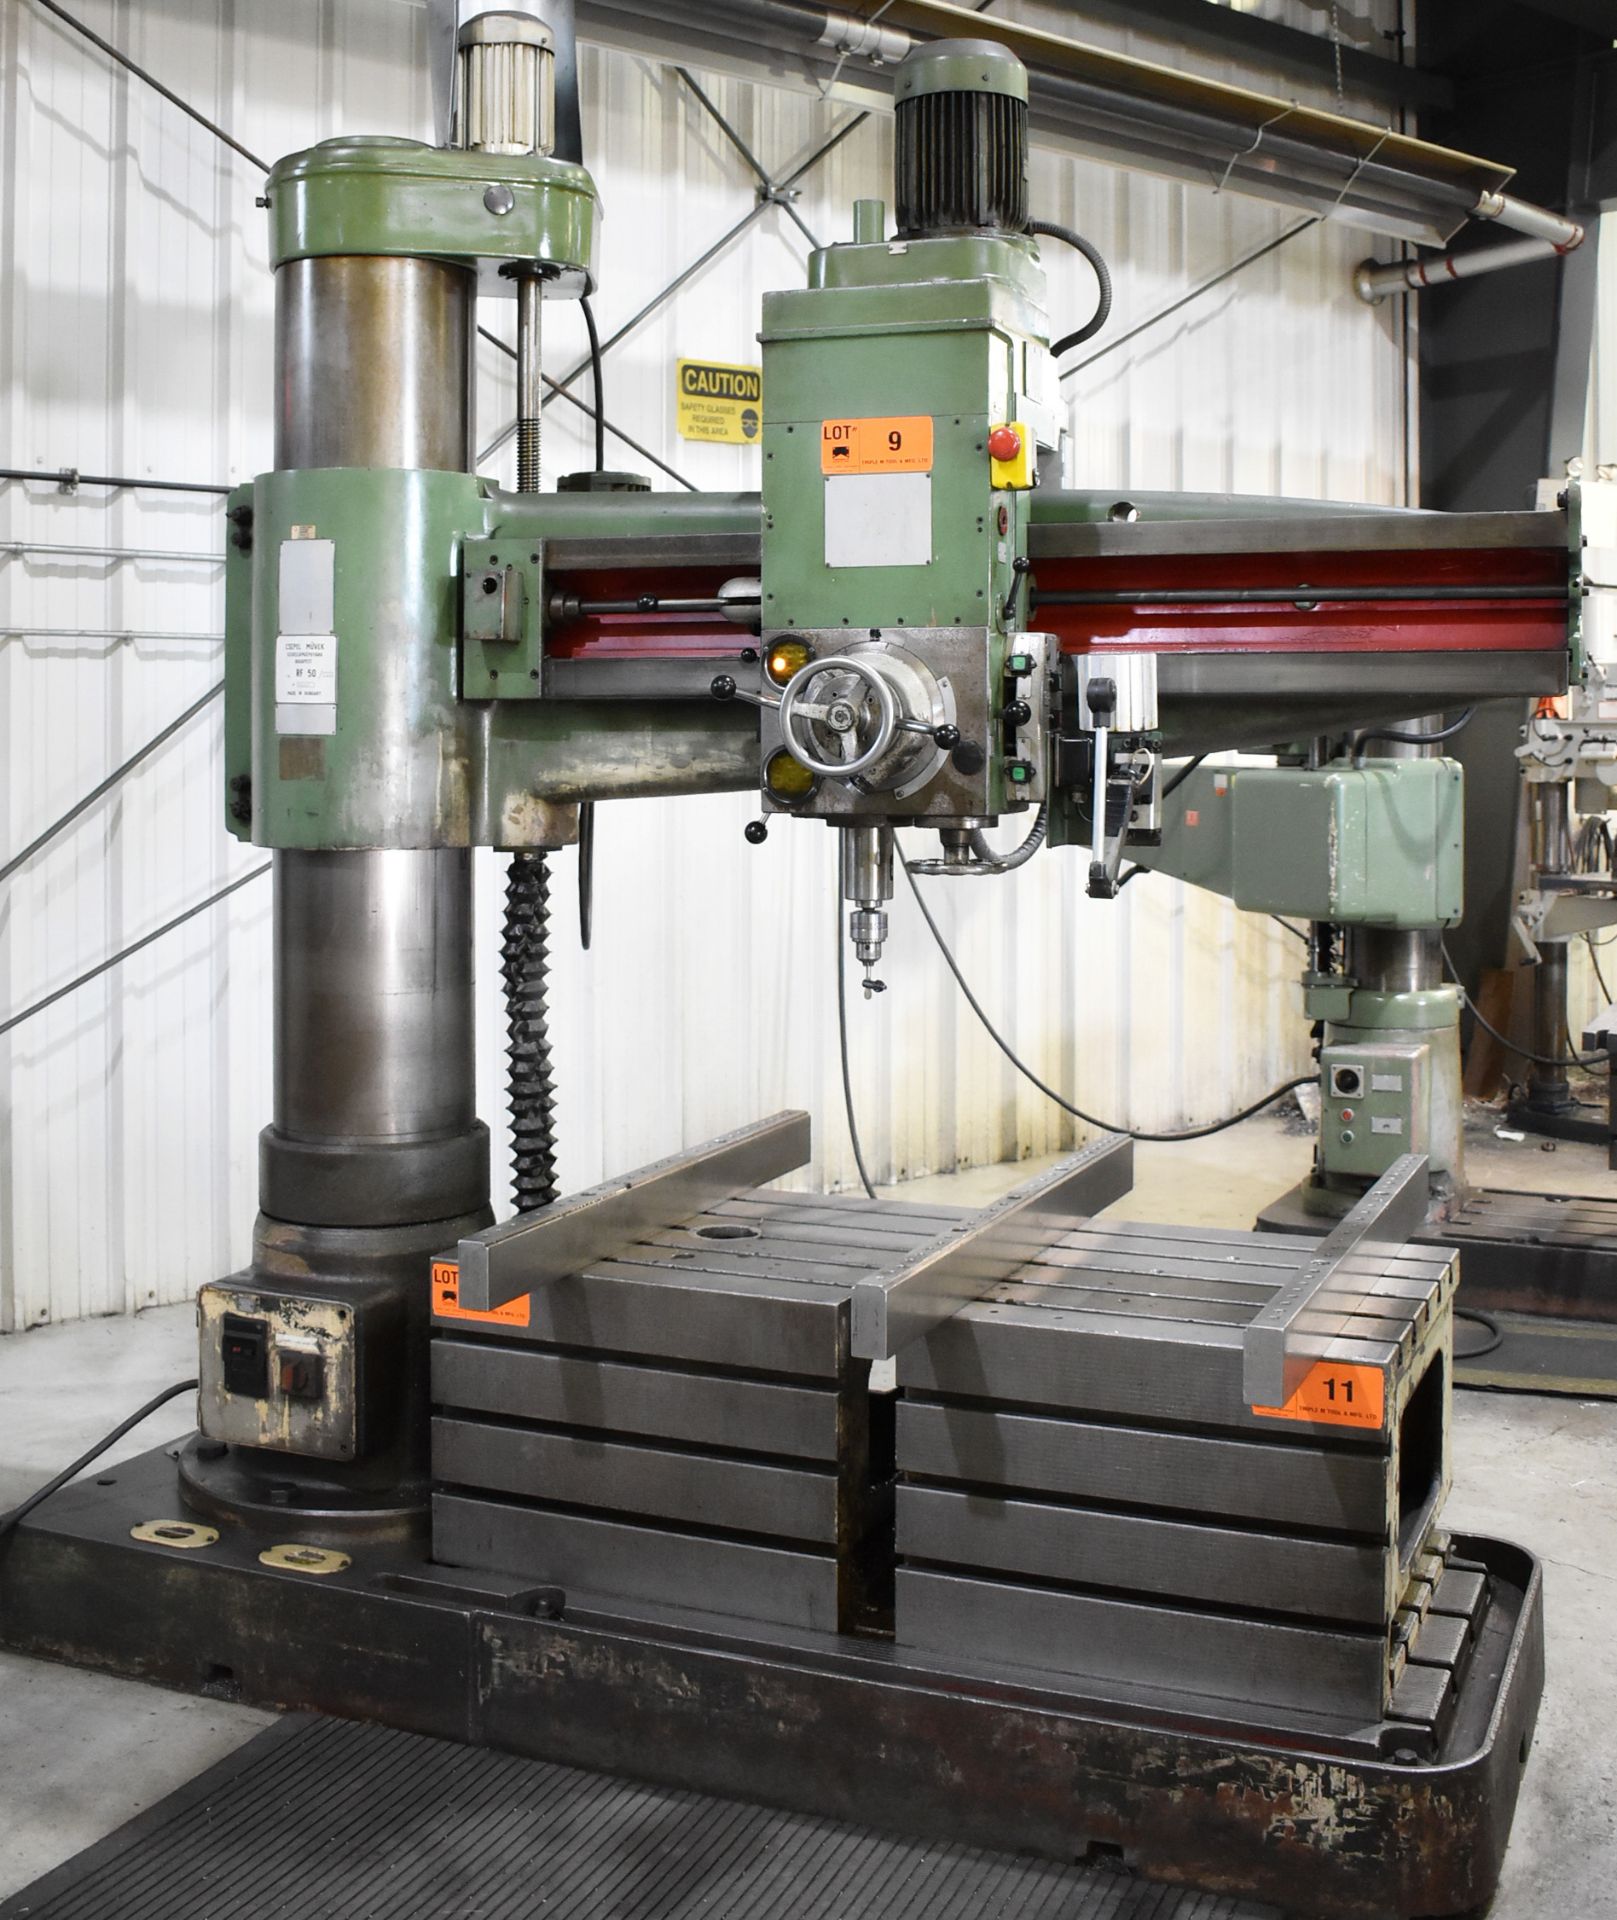 CSEPEL RF-50/1600 5' RADIAL ARM DRILL WITH 36" COLUMN TRAVEL, SPEEDS TO 2240 RPM, S/N: 12580 (CI) [